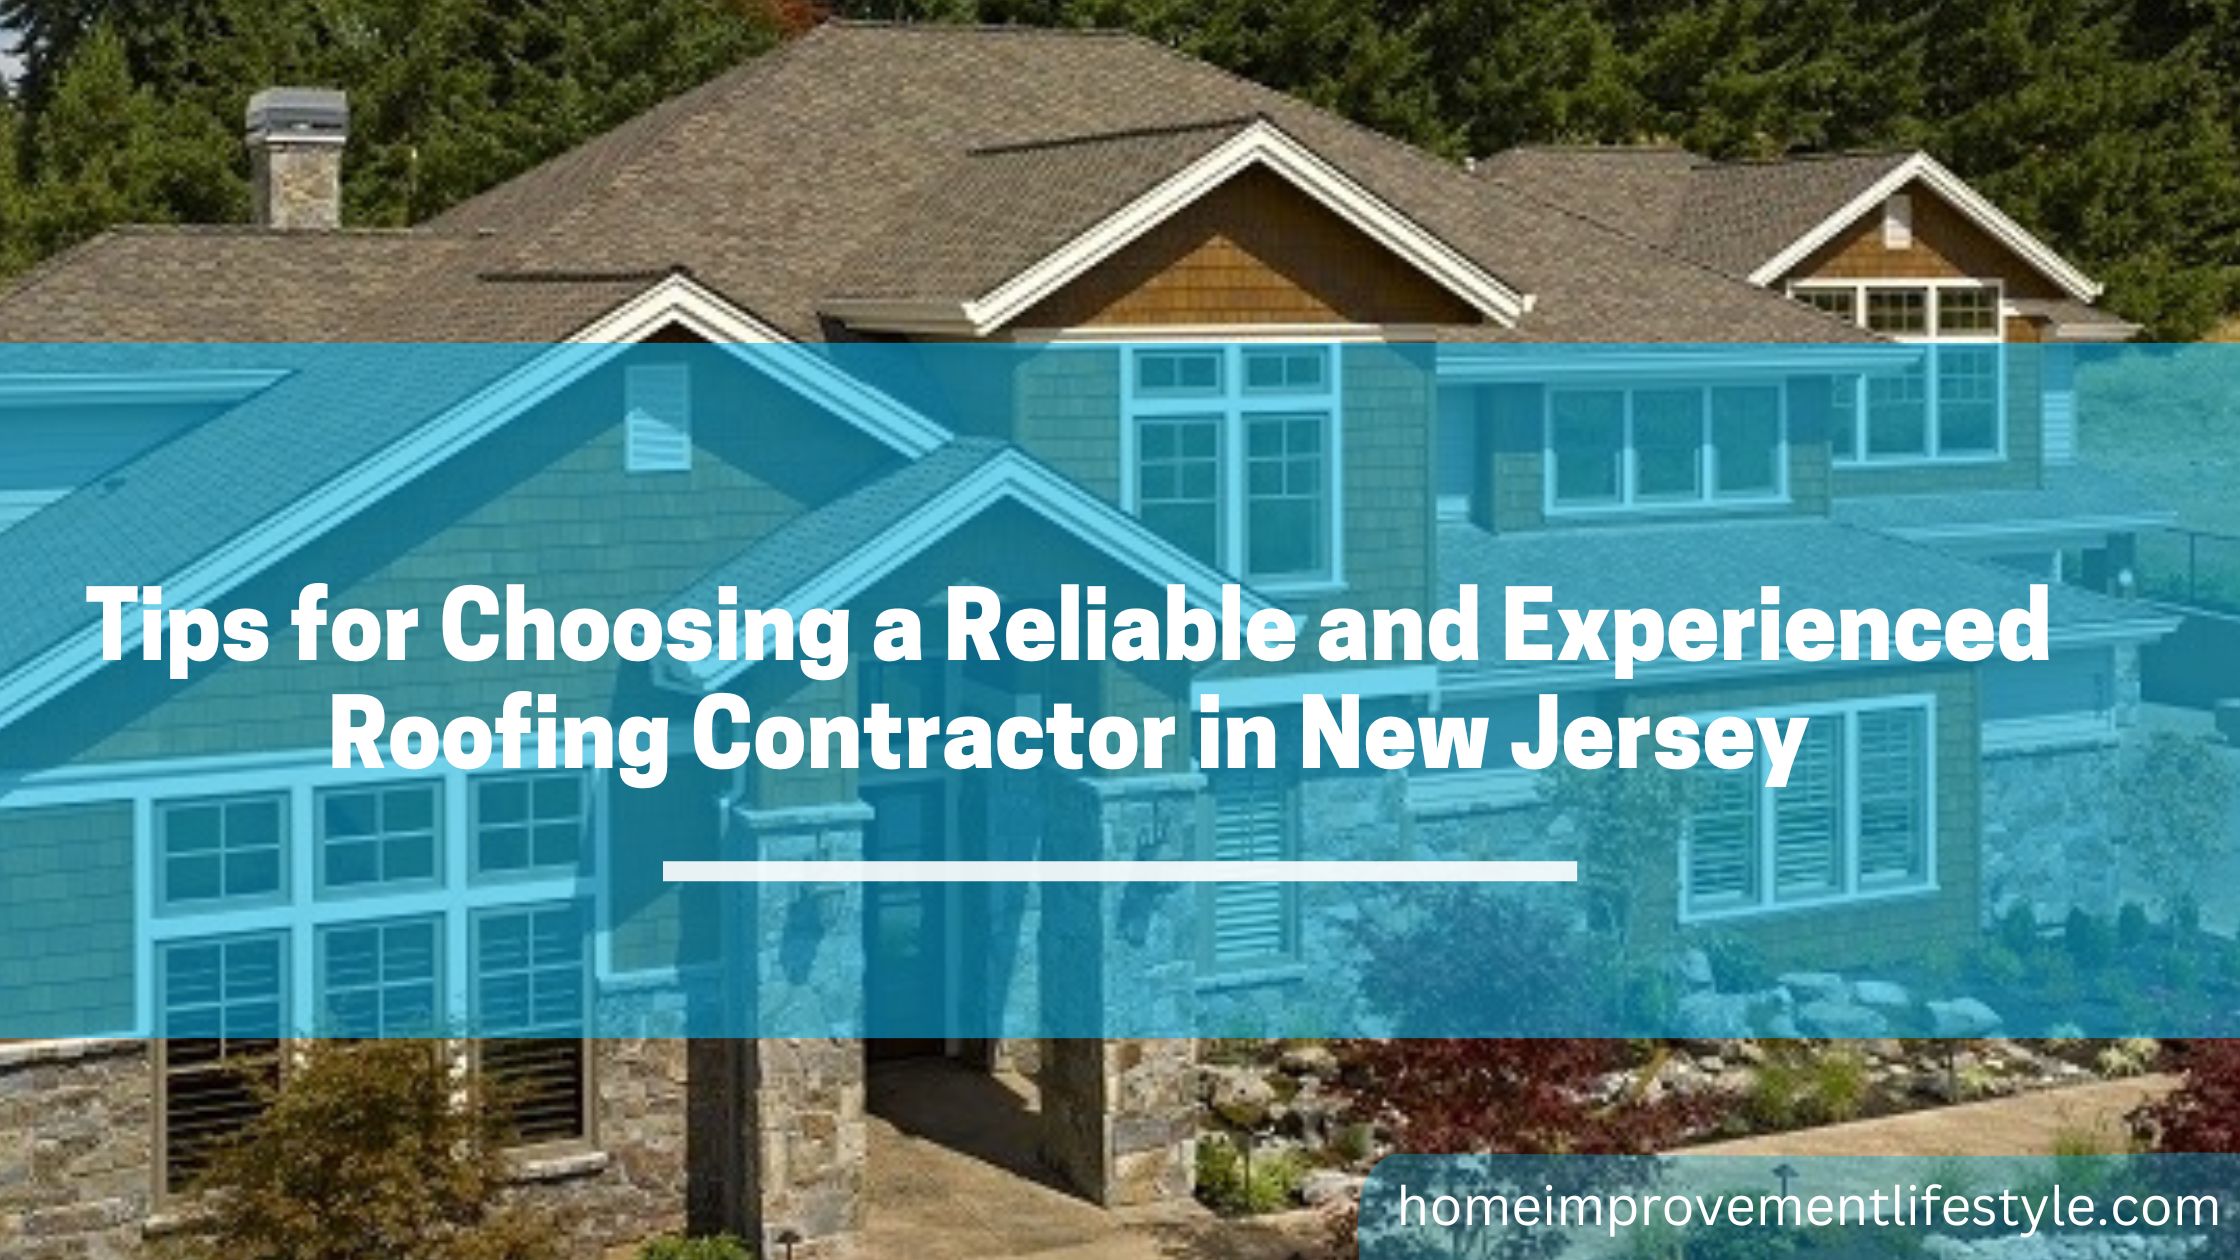 Tips for Choosing a Reliable and Experienced Roofing Contractor in New Jersey